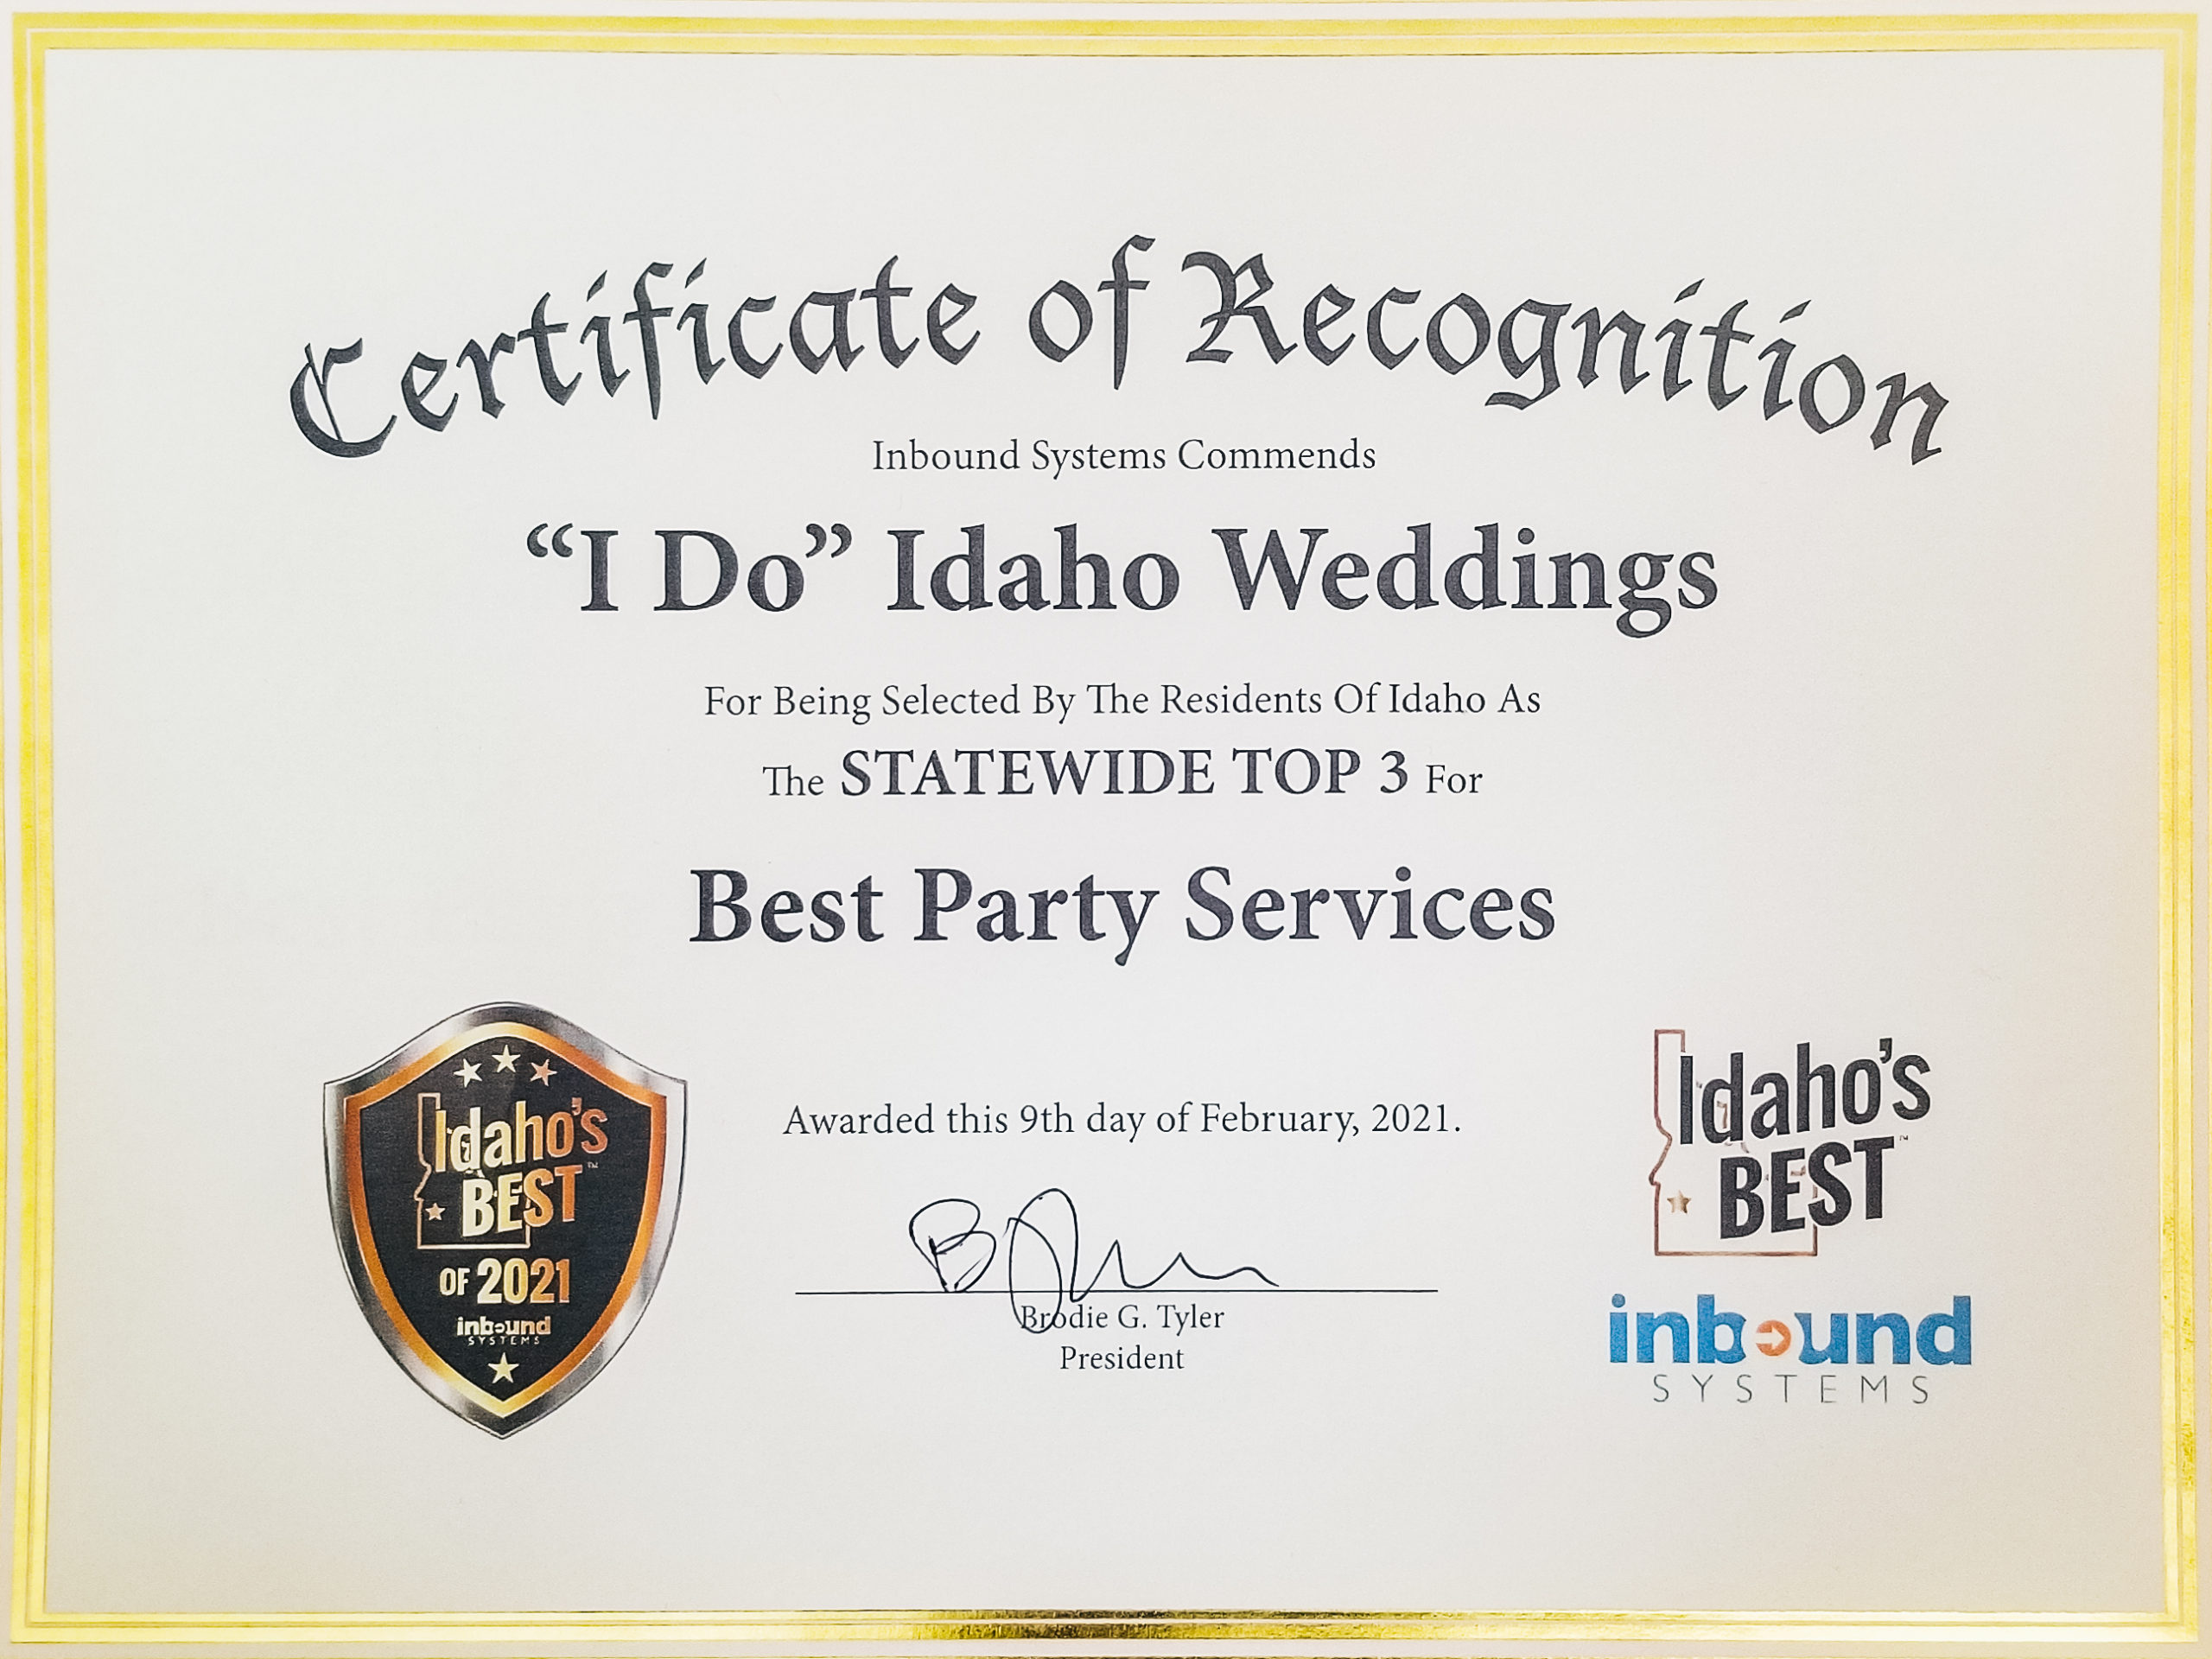 Award from Idaho's Best for "Best Party Services".